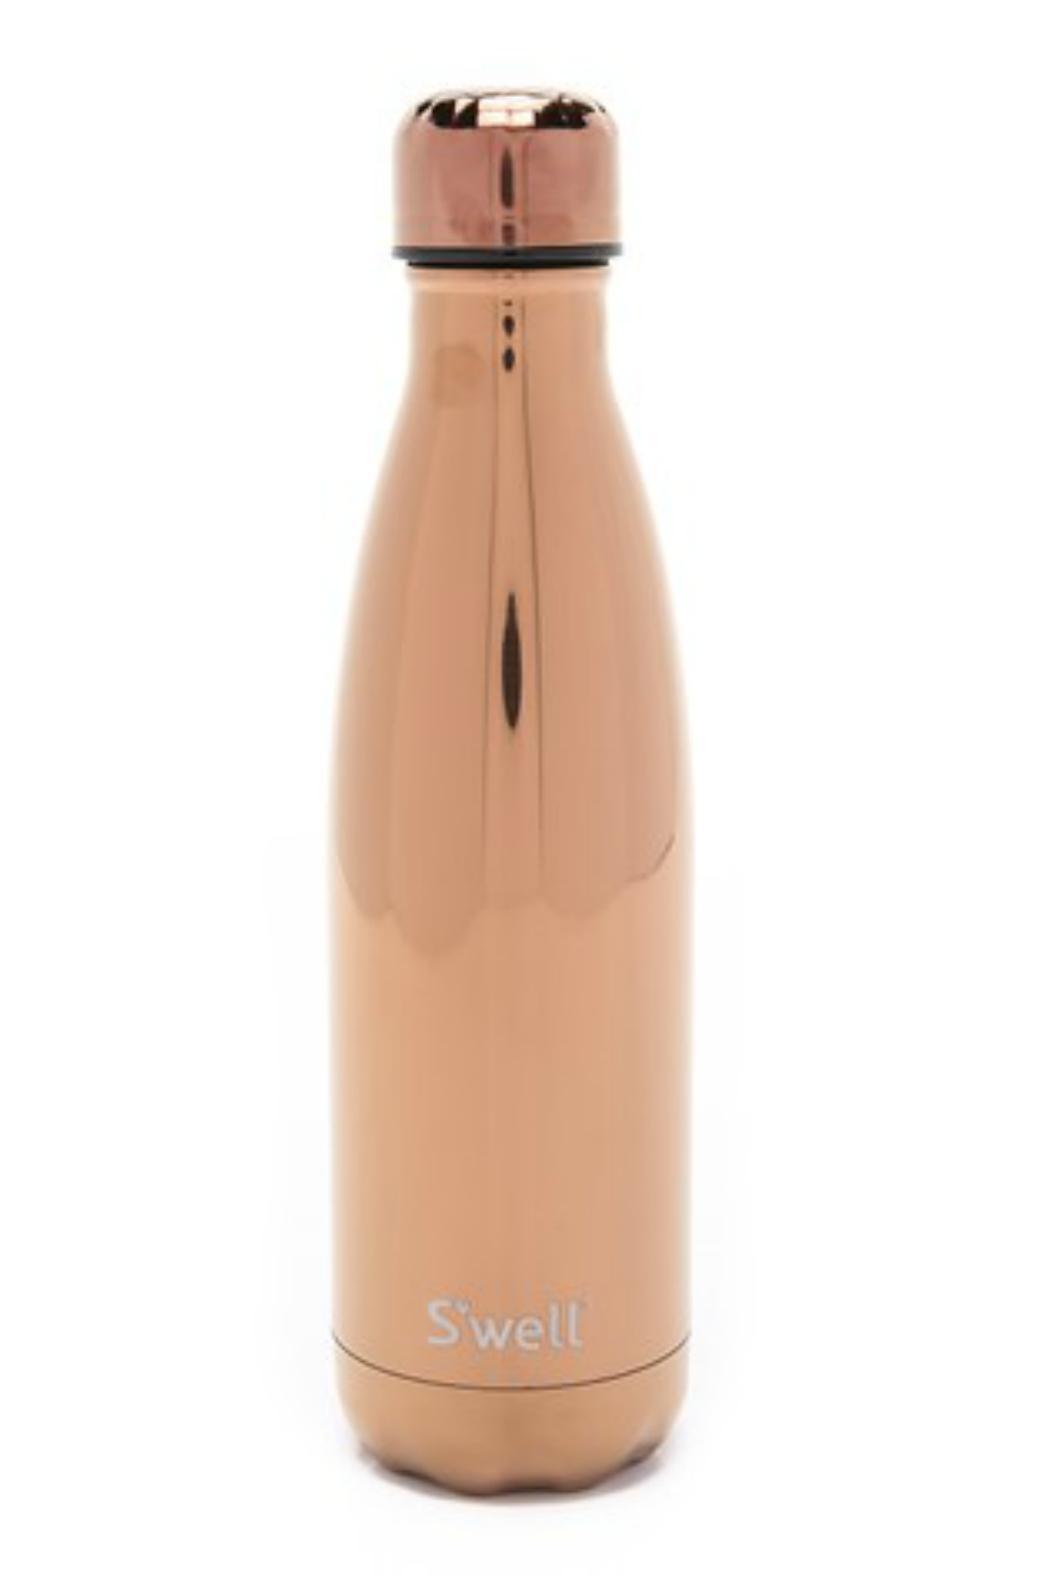 Holiday Gift Guide | Practical Gifts for Friends and Family | Rose Gold S'well Bottle